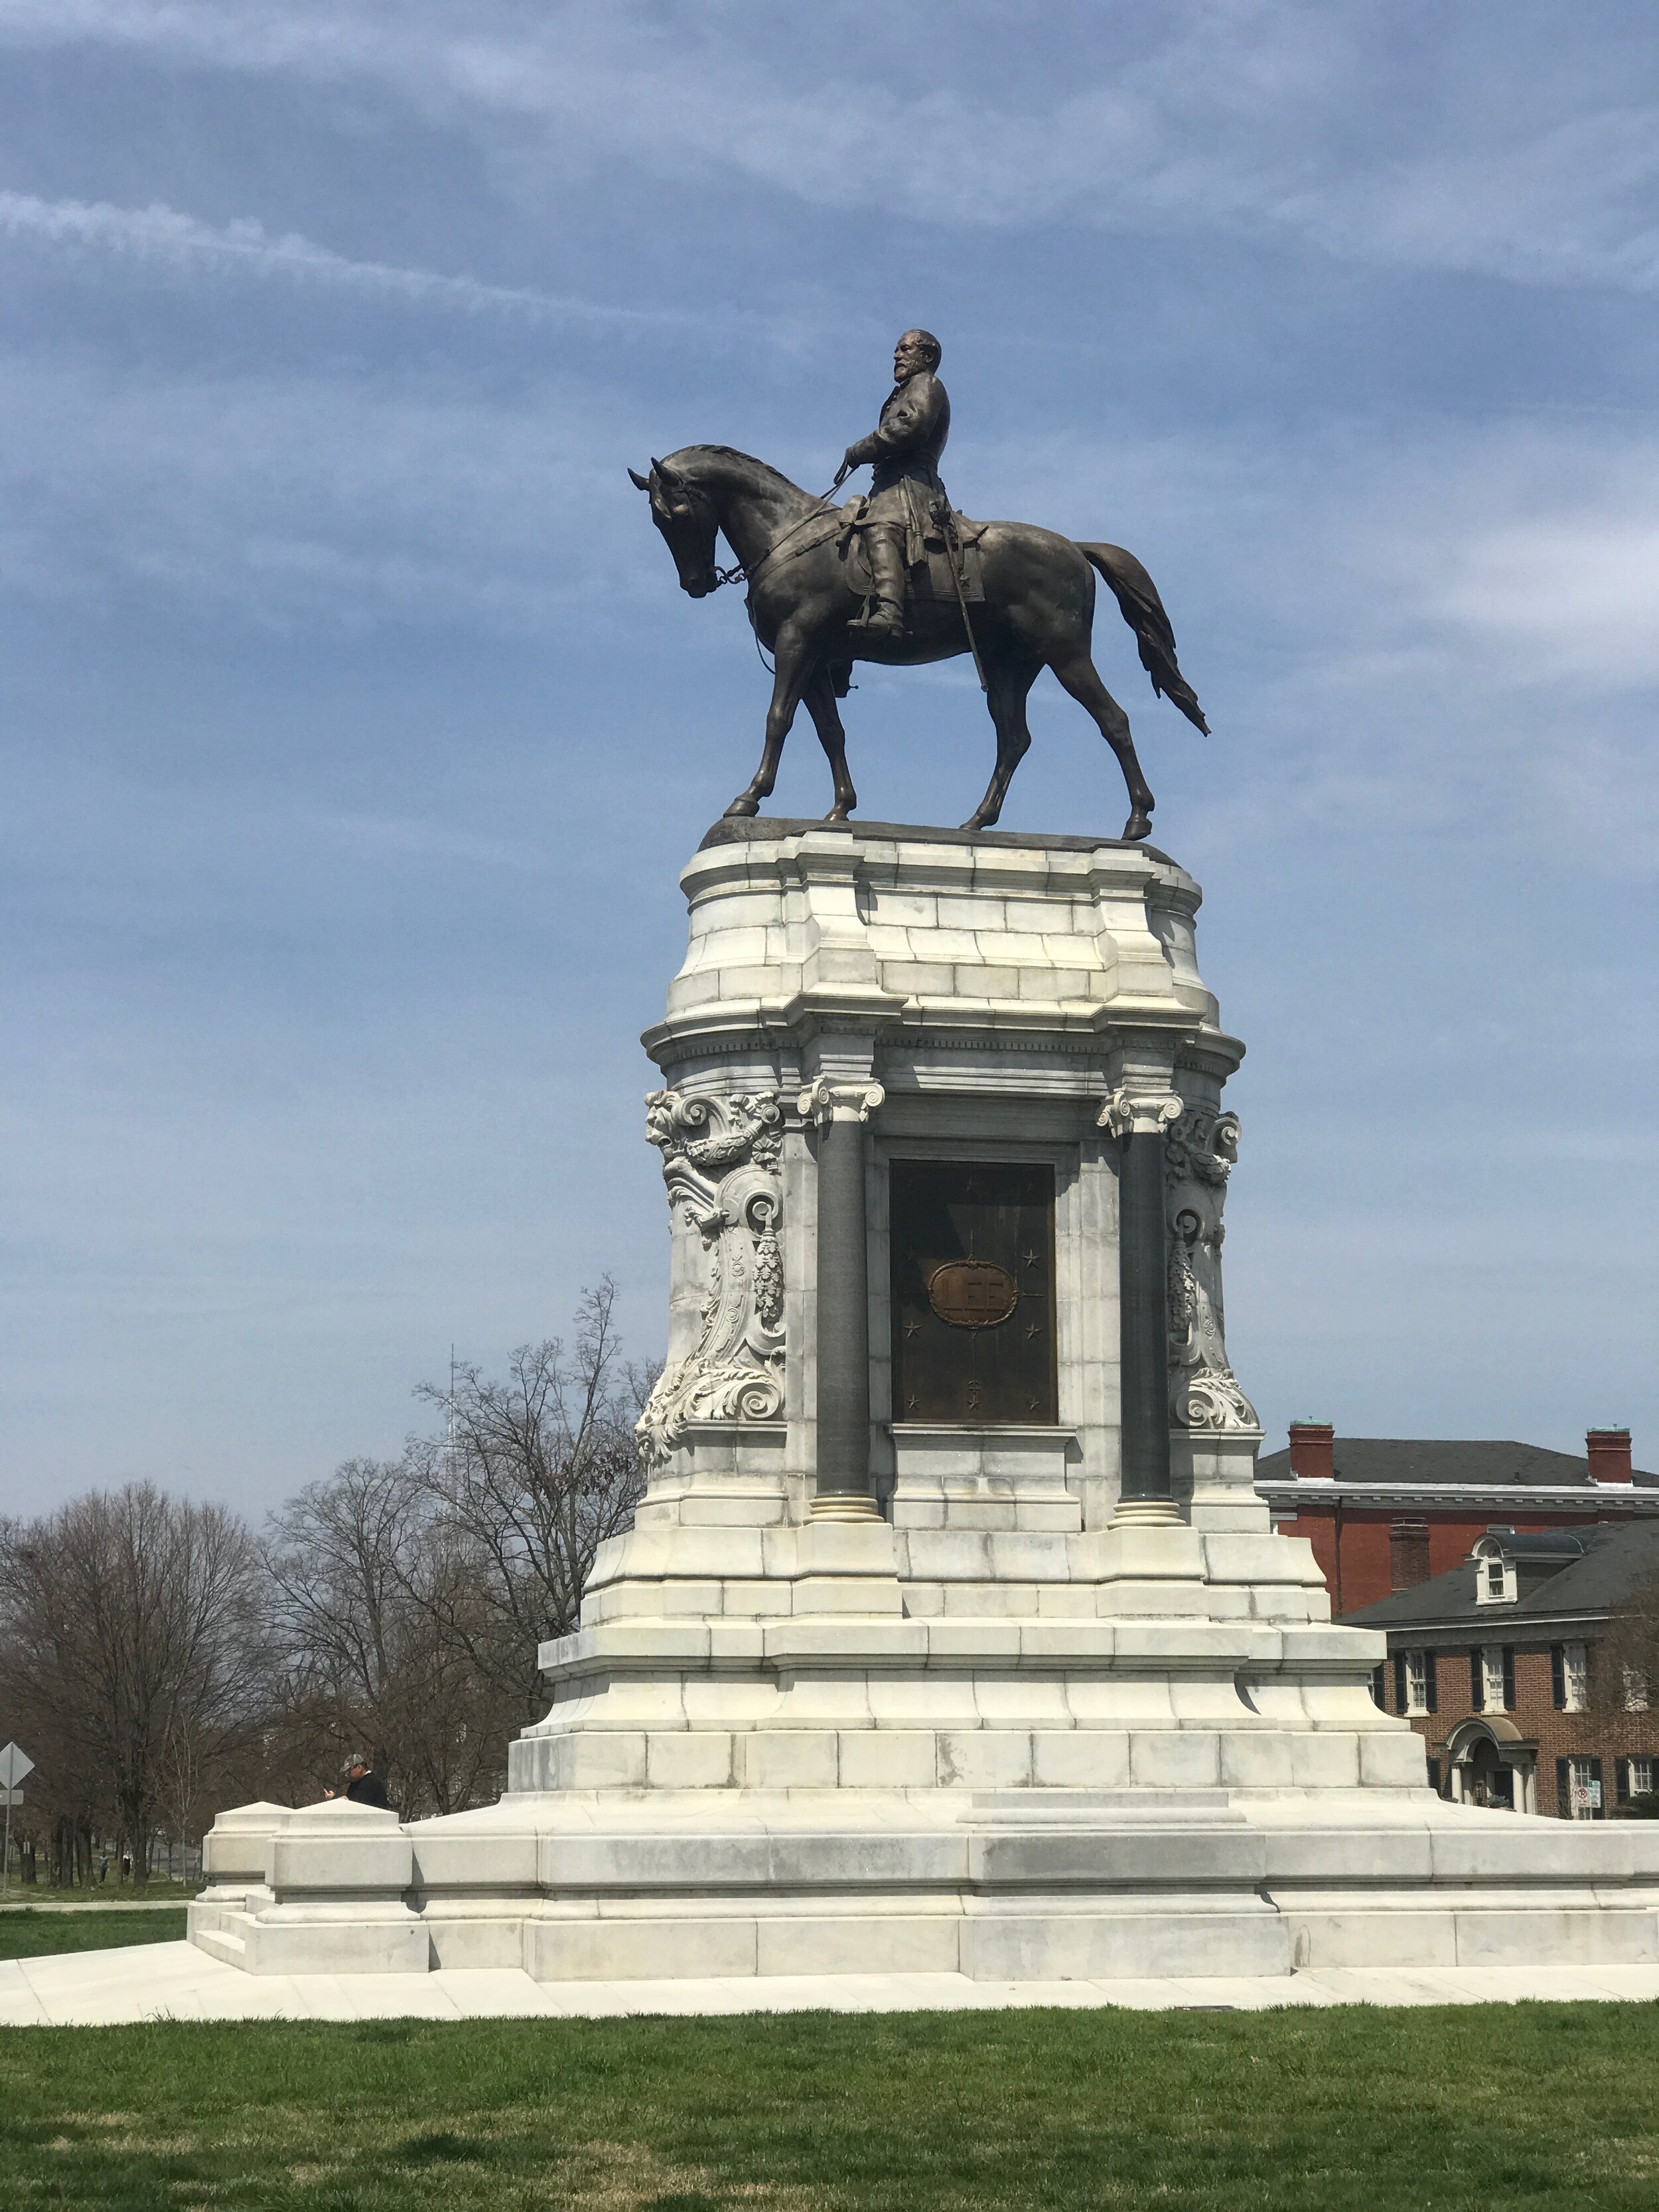  General Lee’s statue on Richmond’s Monument Ave. when I visited in 2019. More about Monument Ave.  here . 